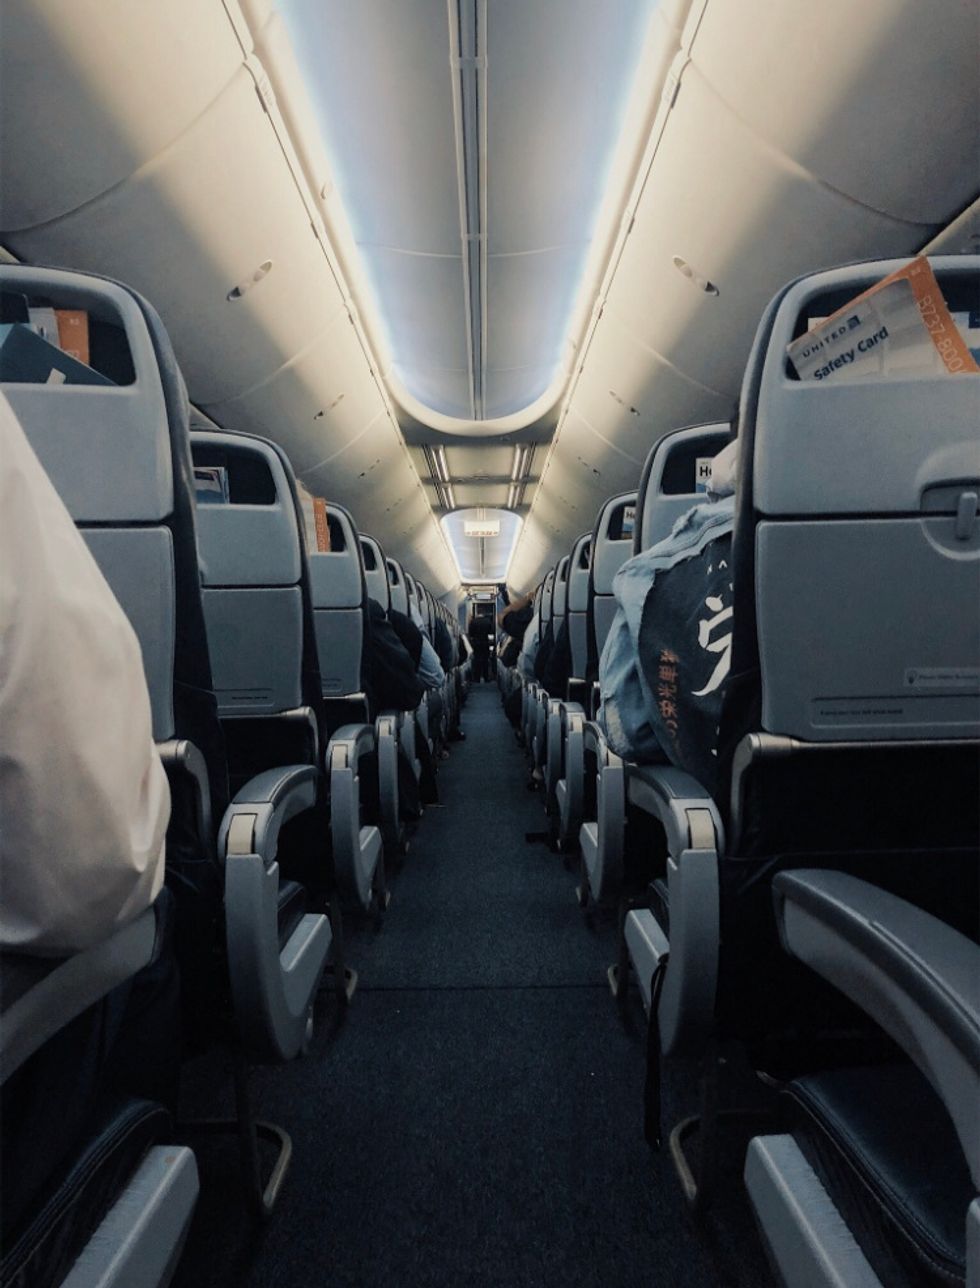 Things You Should Know Before You Get On A Plane